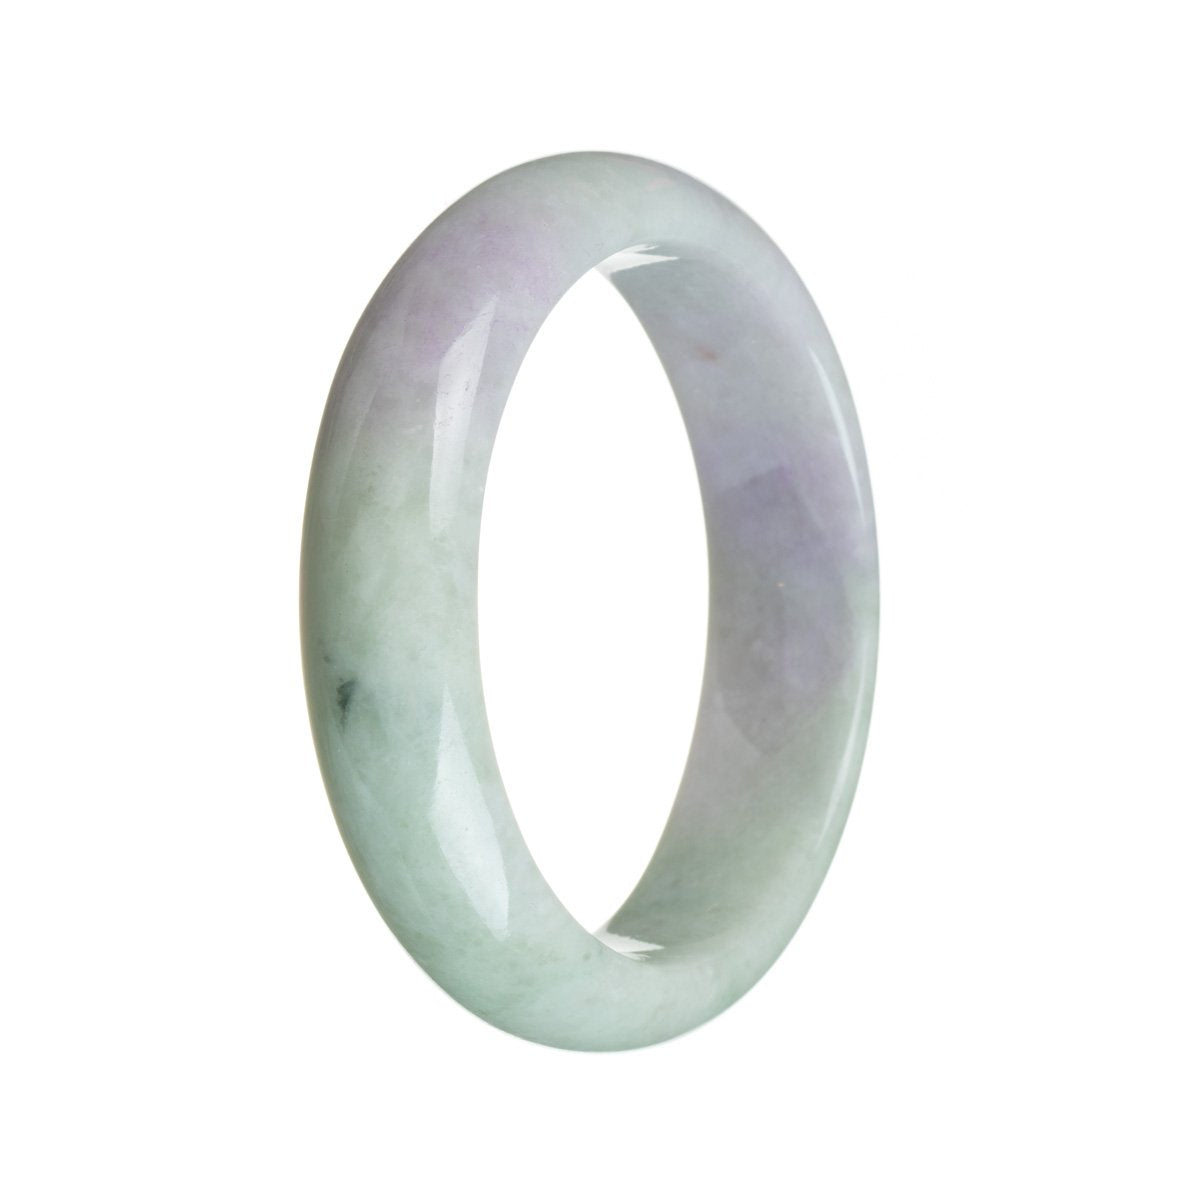 A close-up image of a lavender and green traditional jade bangle with a half-moon shape. The bangle is certified Type A and measures 59mm in size.